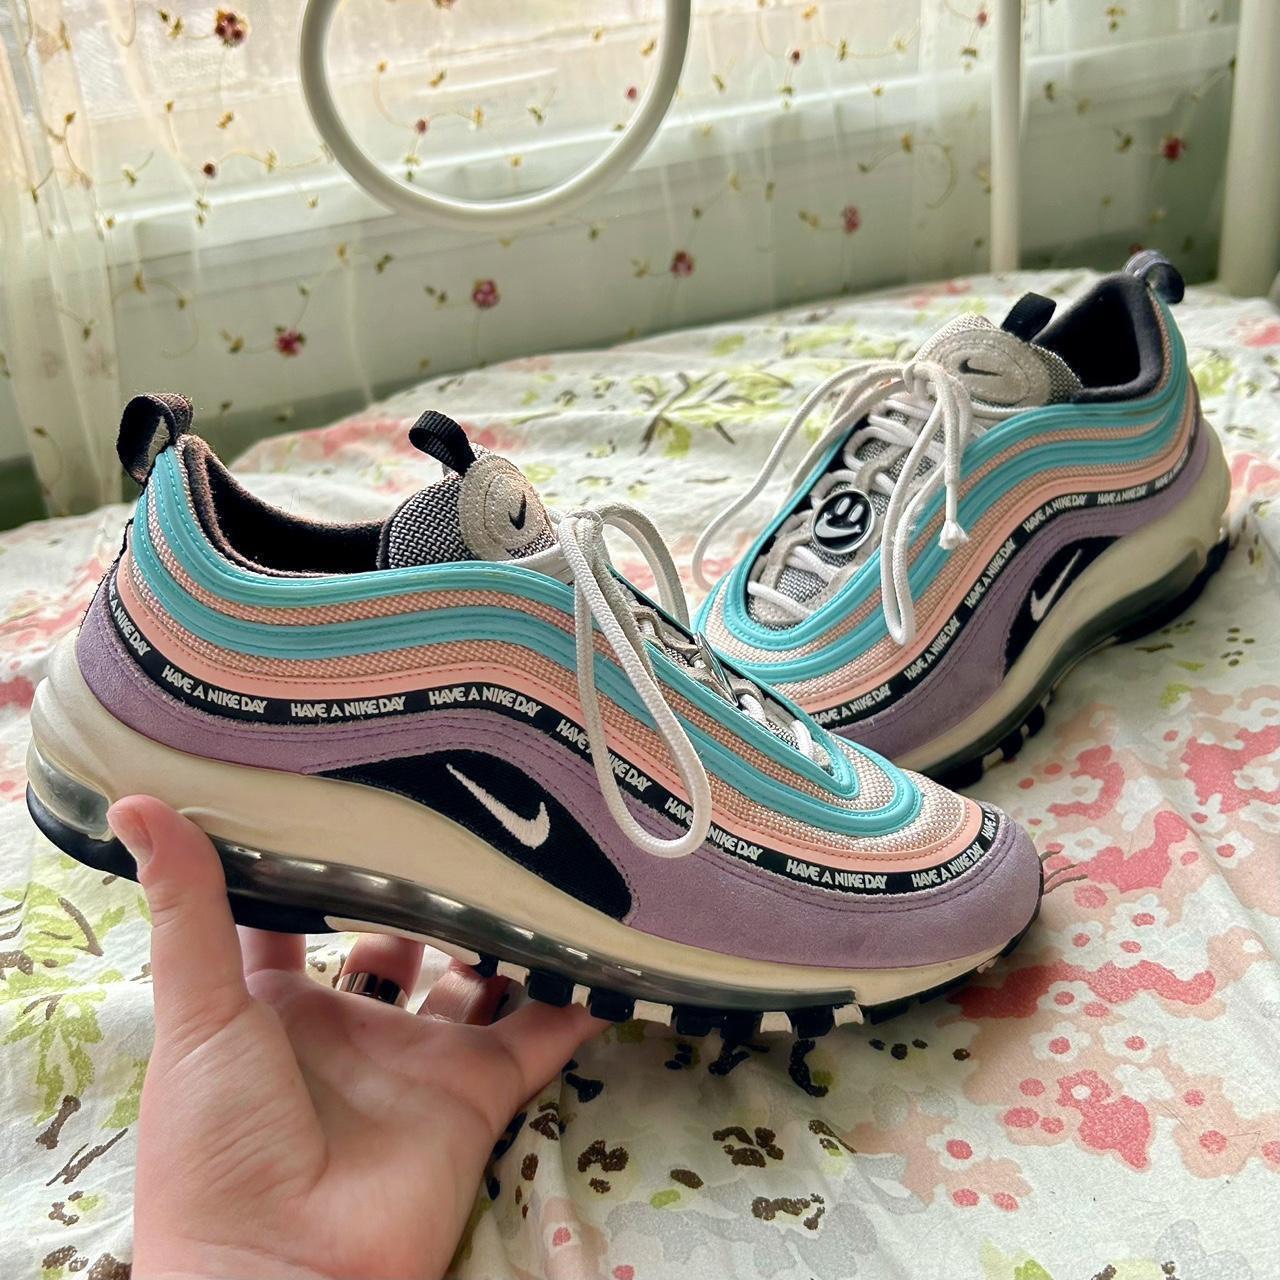 Nike Air 97 “Have a Nike Sneakers 😊 Awesome... -